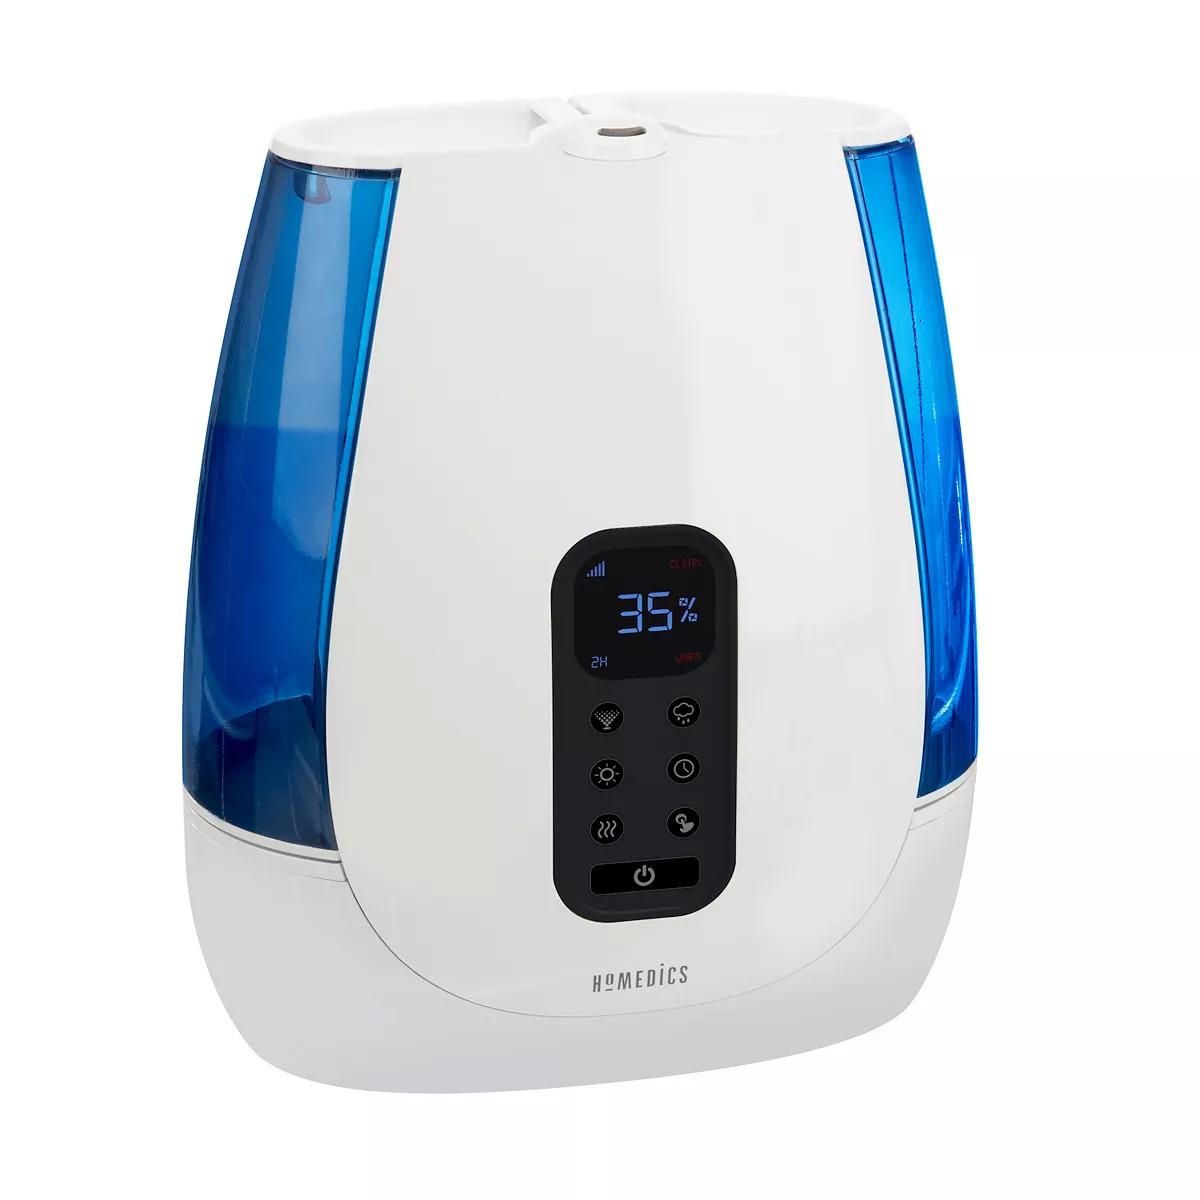 HoMedics TotalComfort Deluxe Warm and Cool Mist Humidifier for $31.99